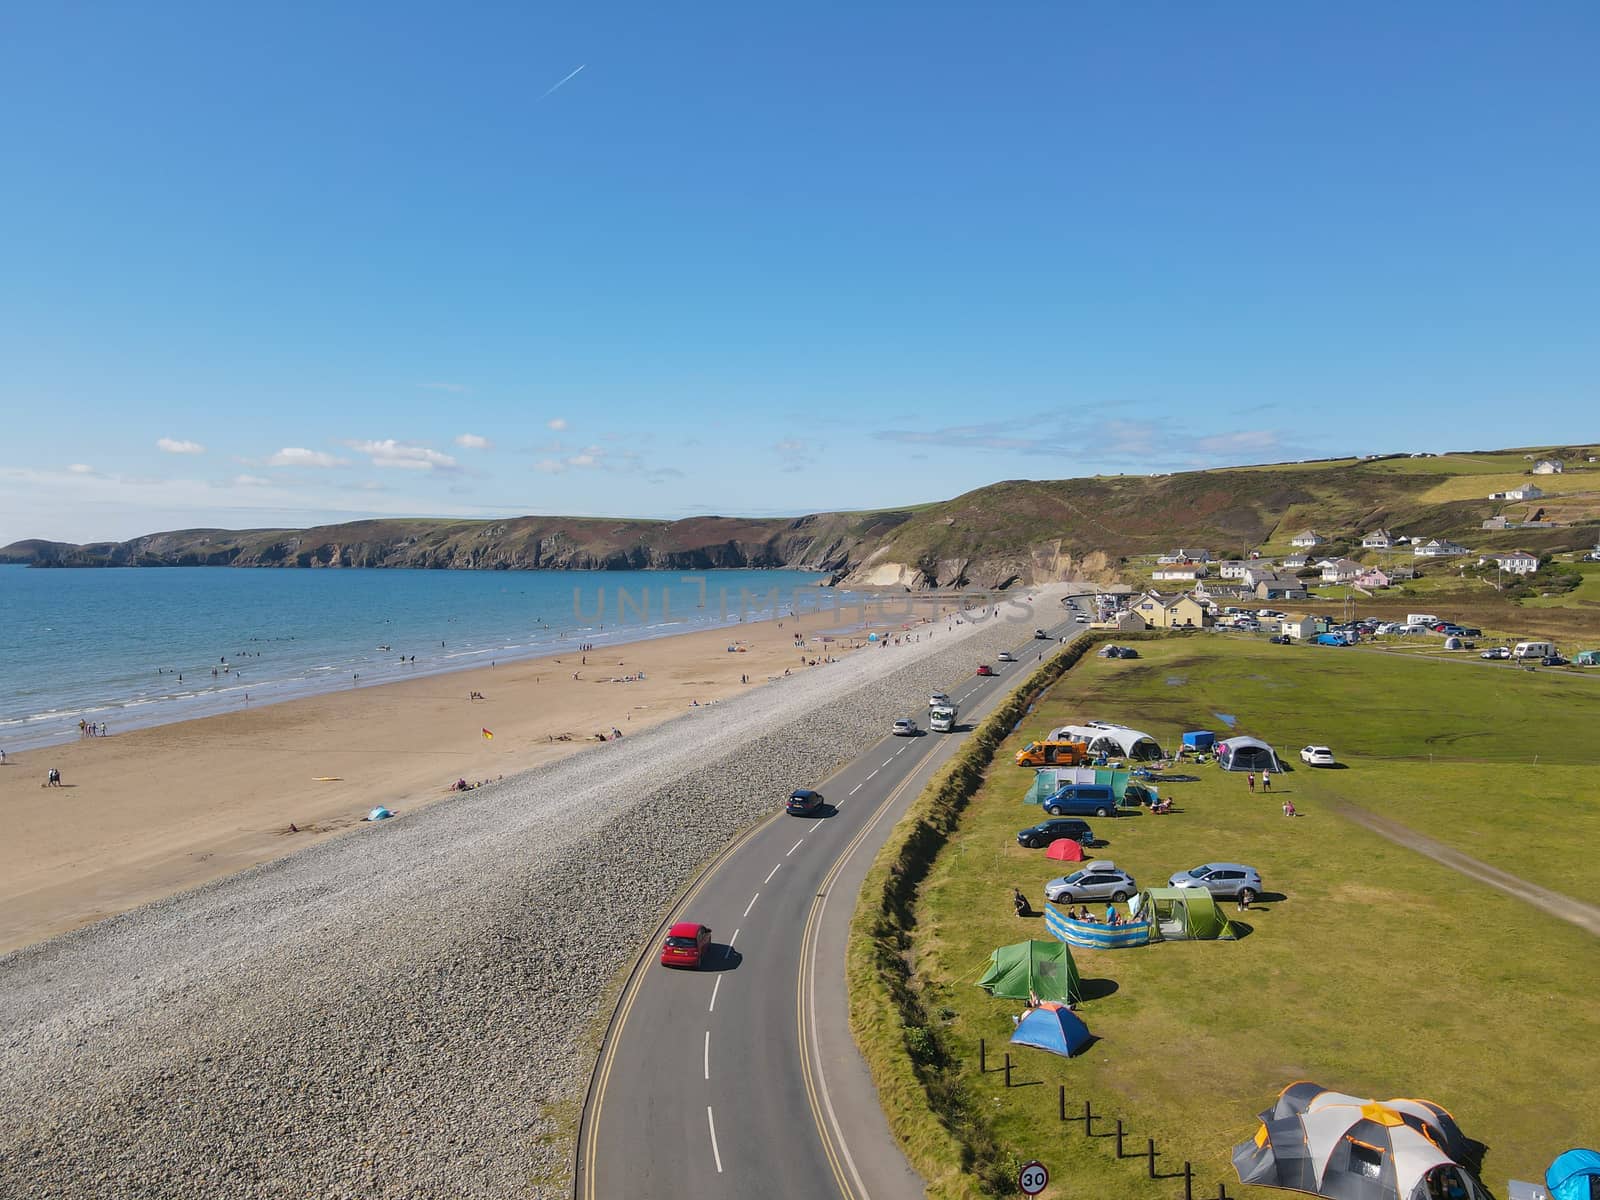 Ariel Shot: Approaching Newgale Beach, Pembrokeshire, Wales, UK from the public road. Stunning ocean views from the coast with a light blue sea and a nearby camp site.